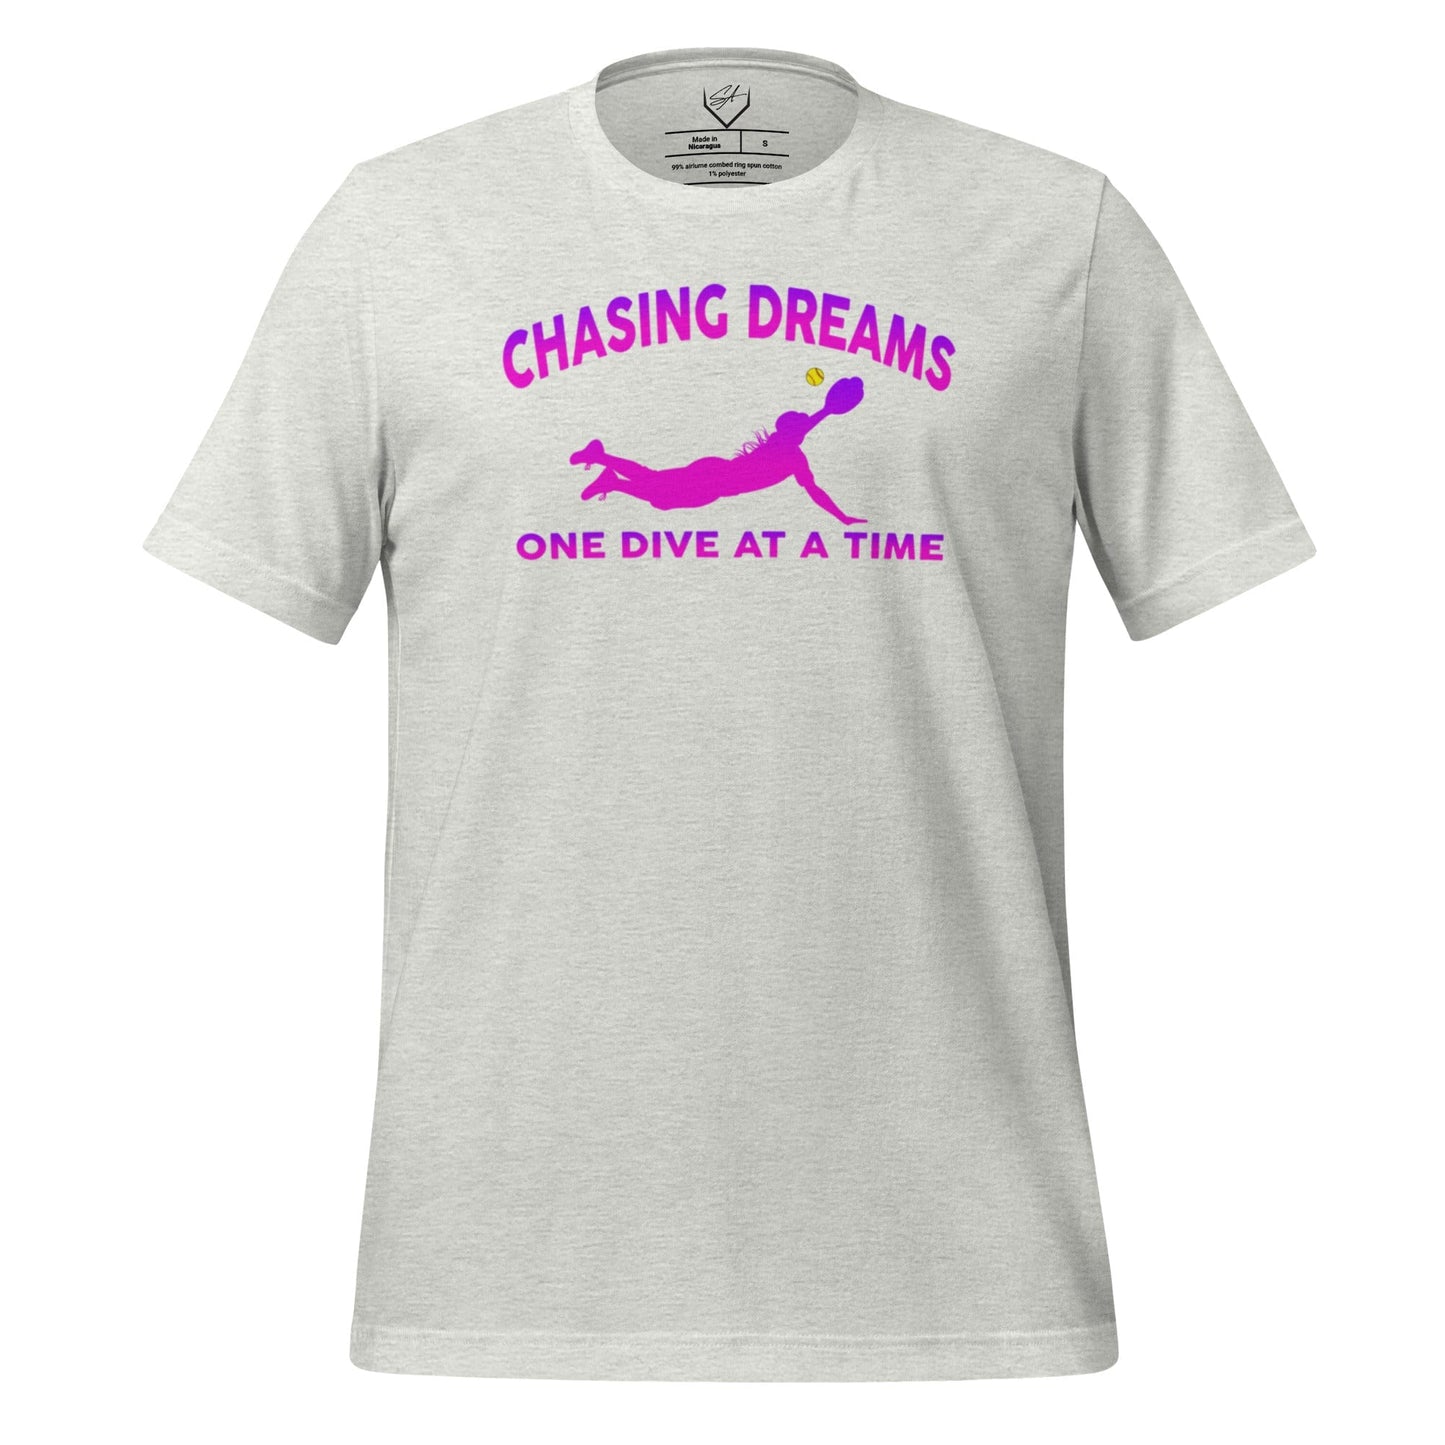 Chasing Dreams One Dive At A Time - Adult Tee